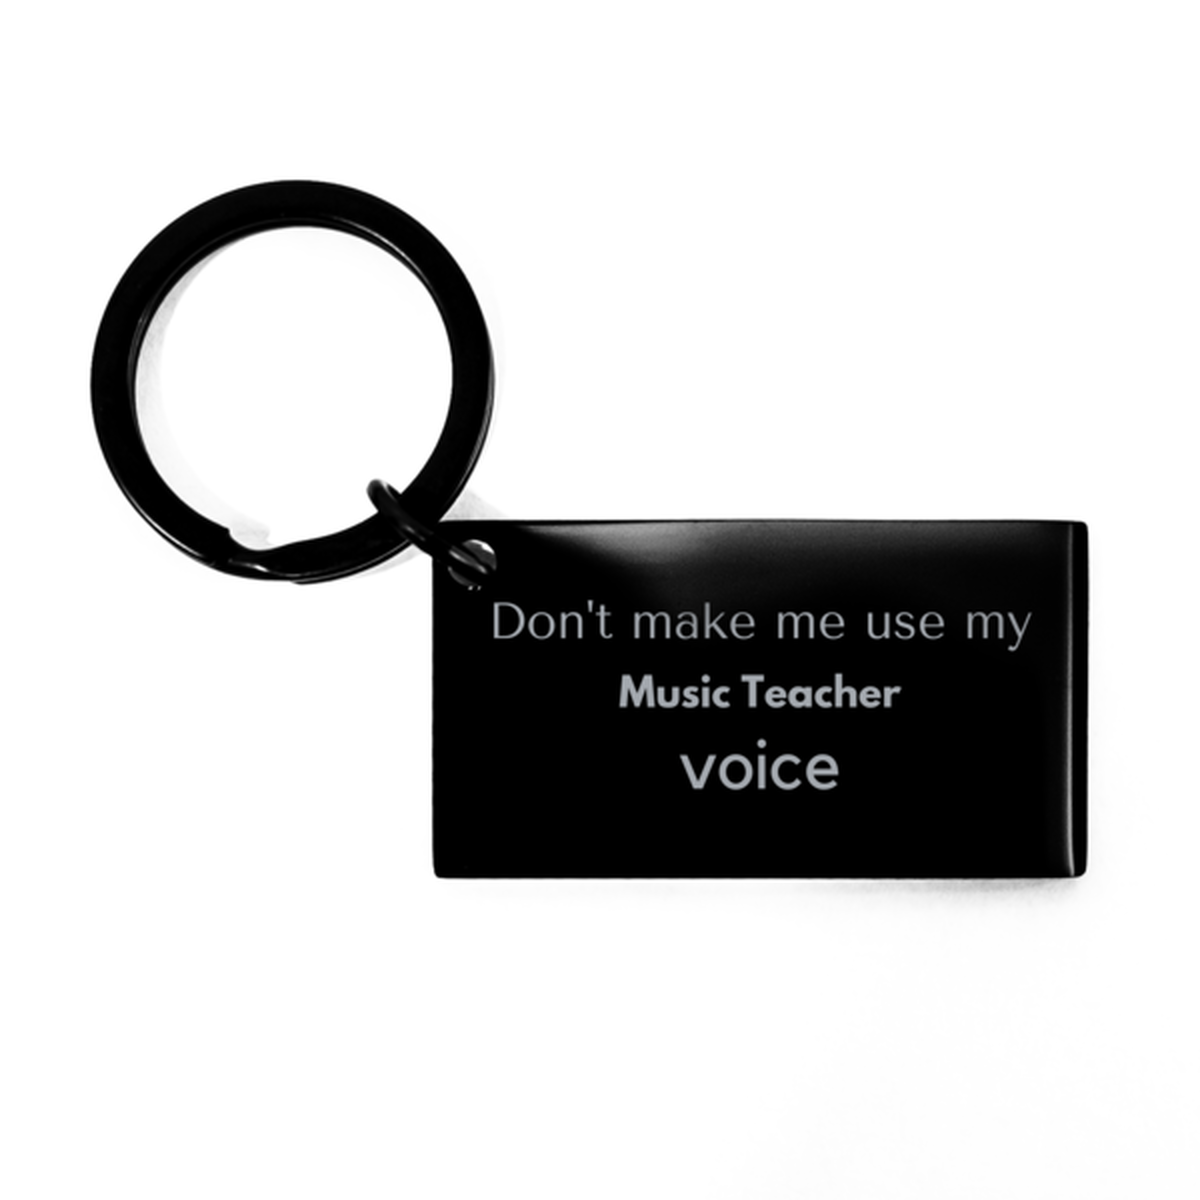 Don't make me use my Music Teacher voice, Sarcasm Music Teacher Gifts, Christmas Music Teacher Keychain Birthday Unique Gifts For Music Teacher Coworkers, Men, Women, Colleague, Friends